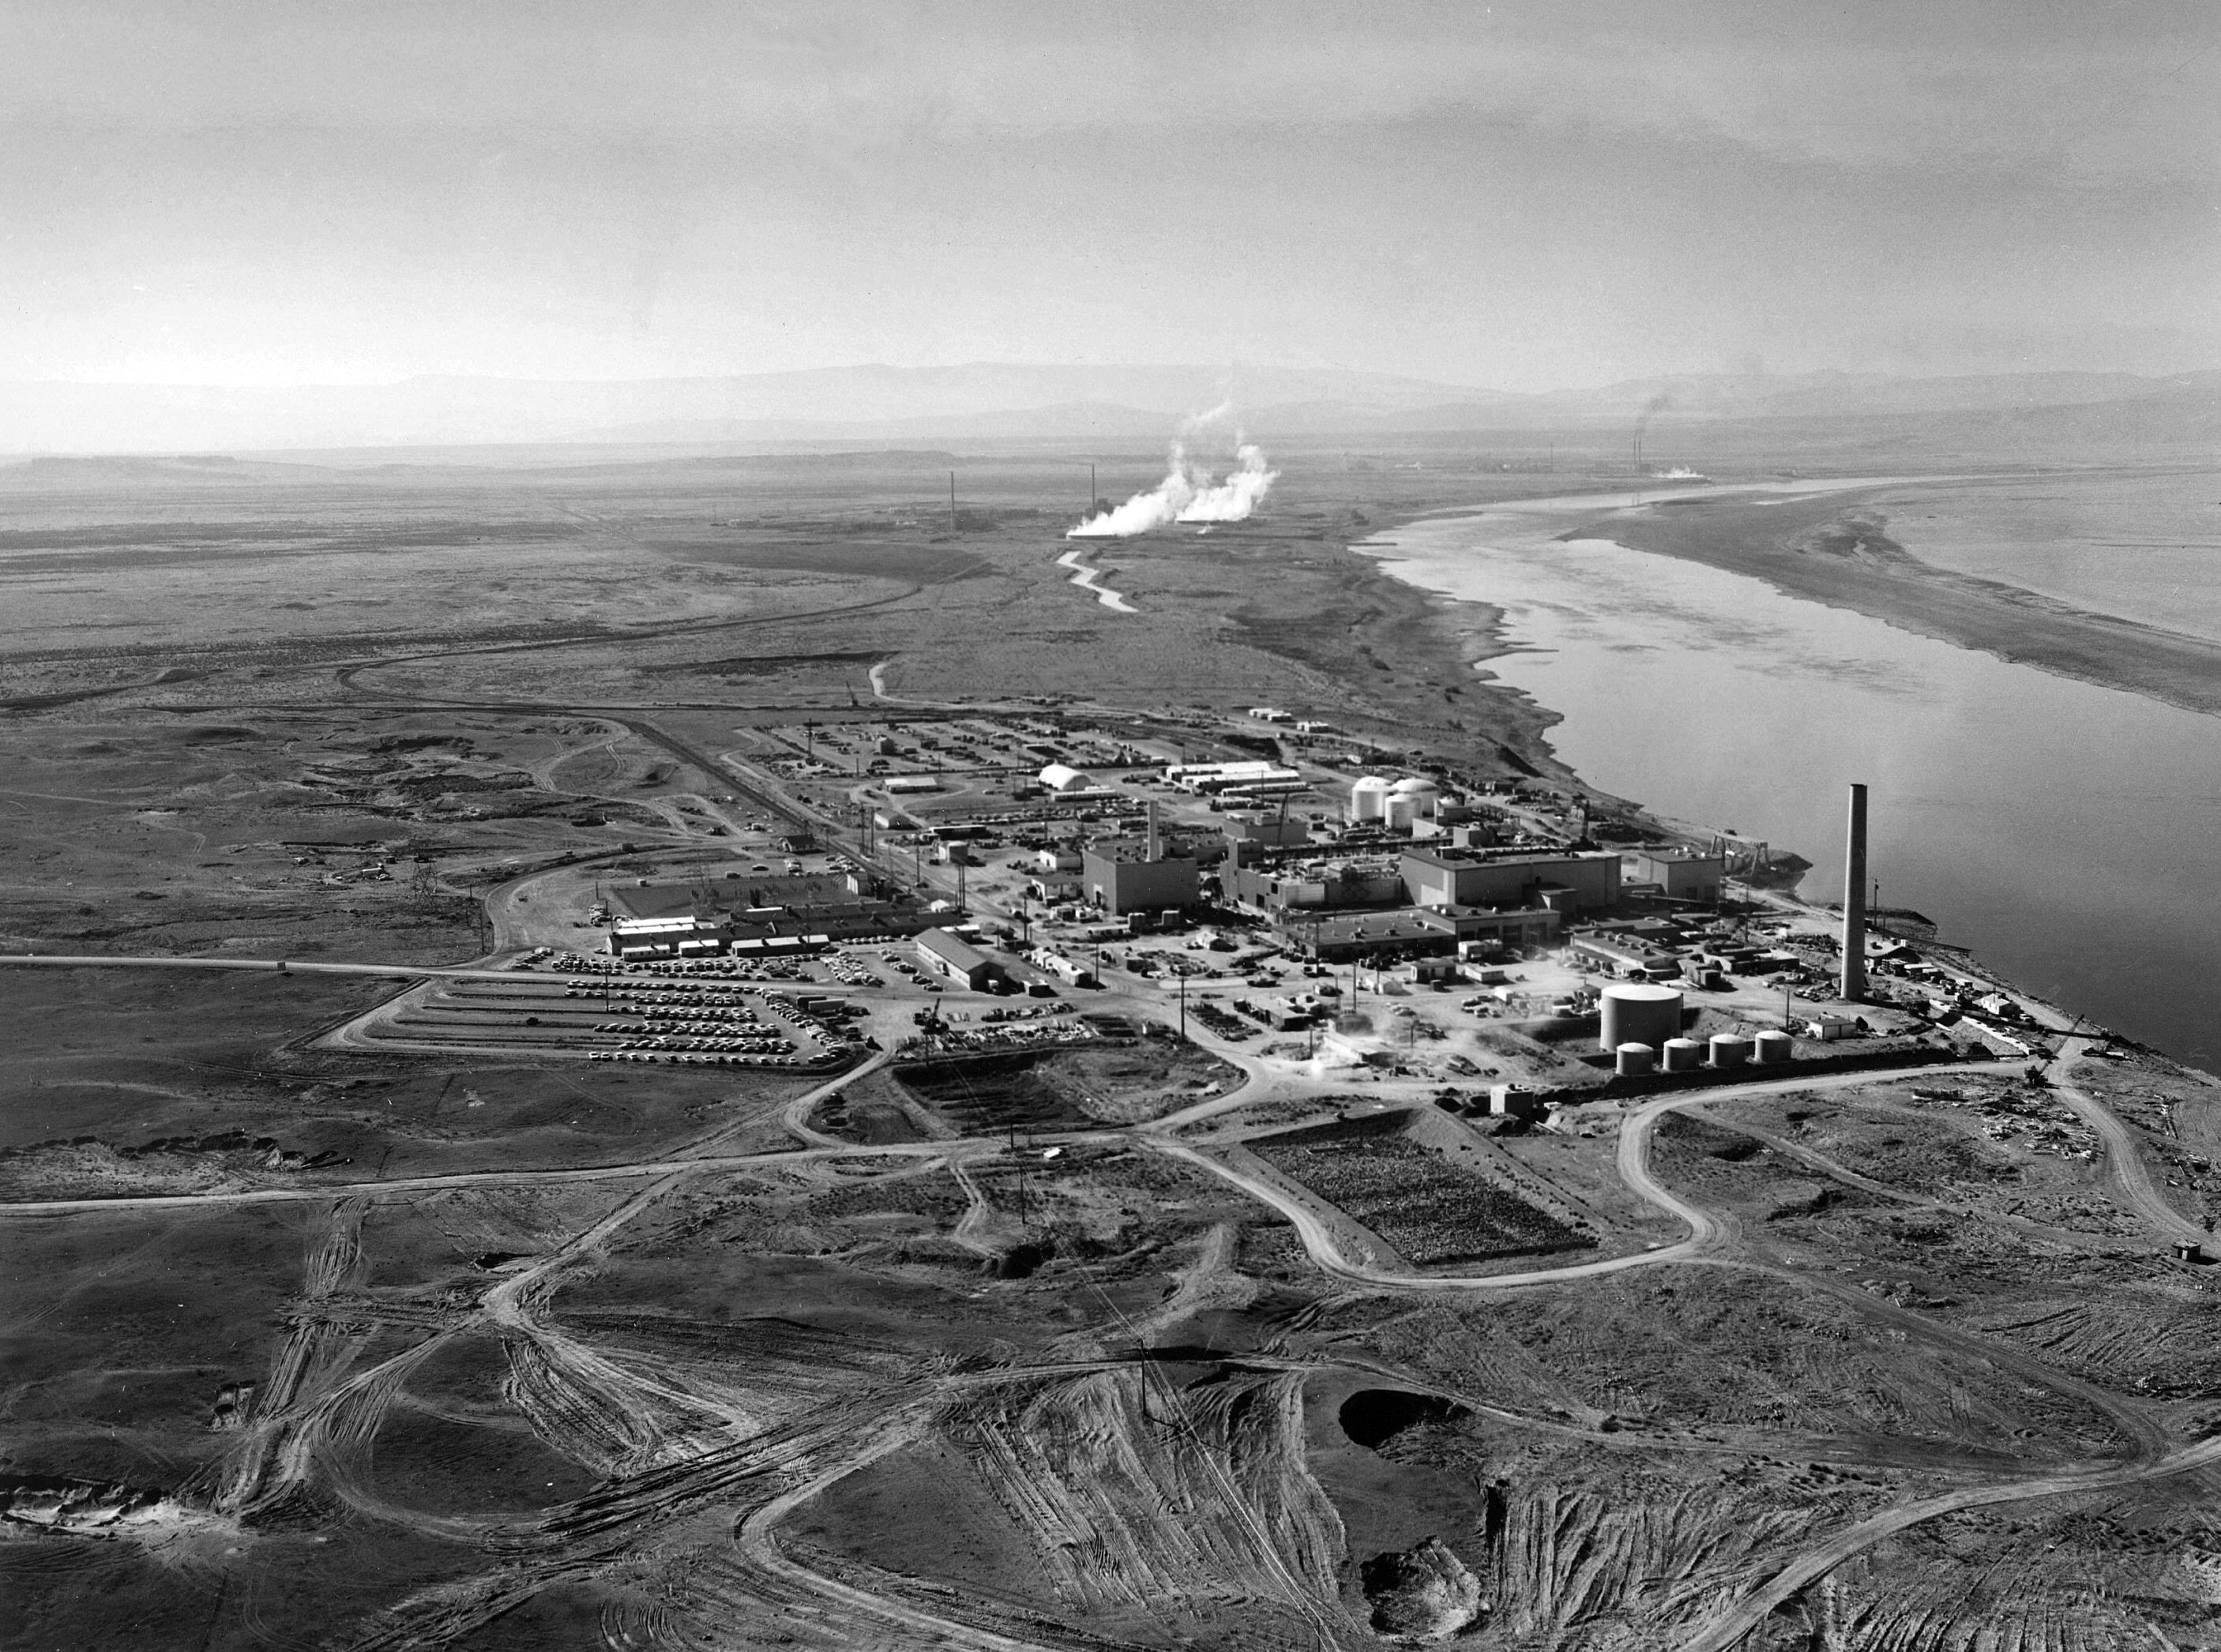 The Hanford Project